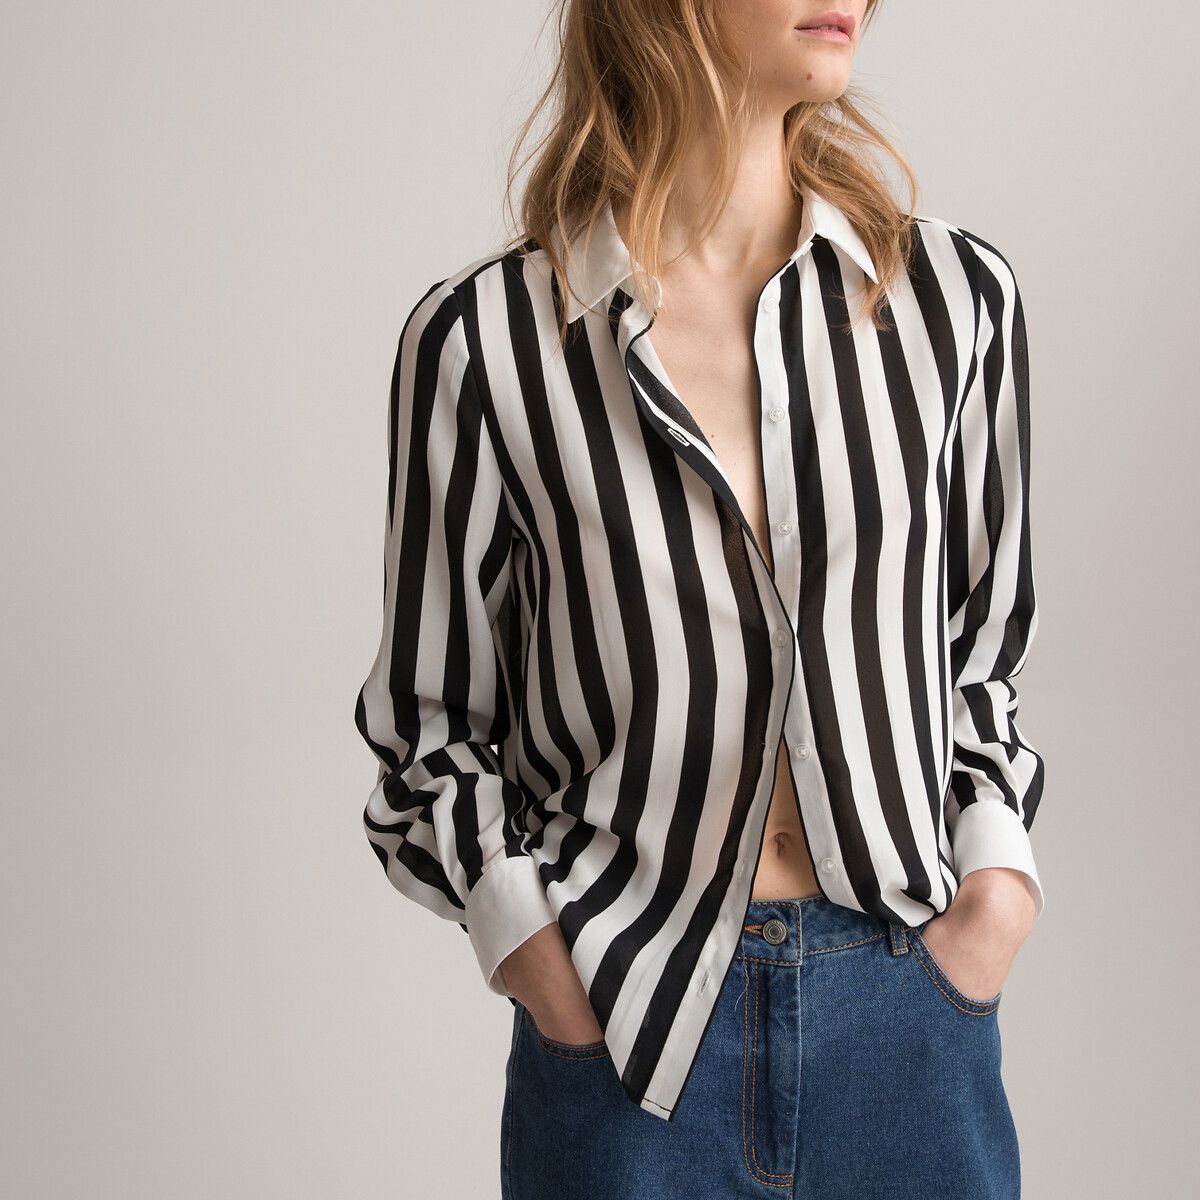 Striped Loose Fit Shirt with Long Sleeves | La Redoute (UK)